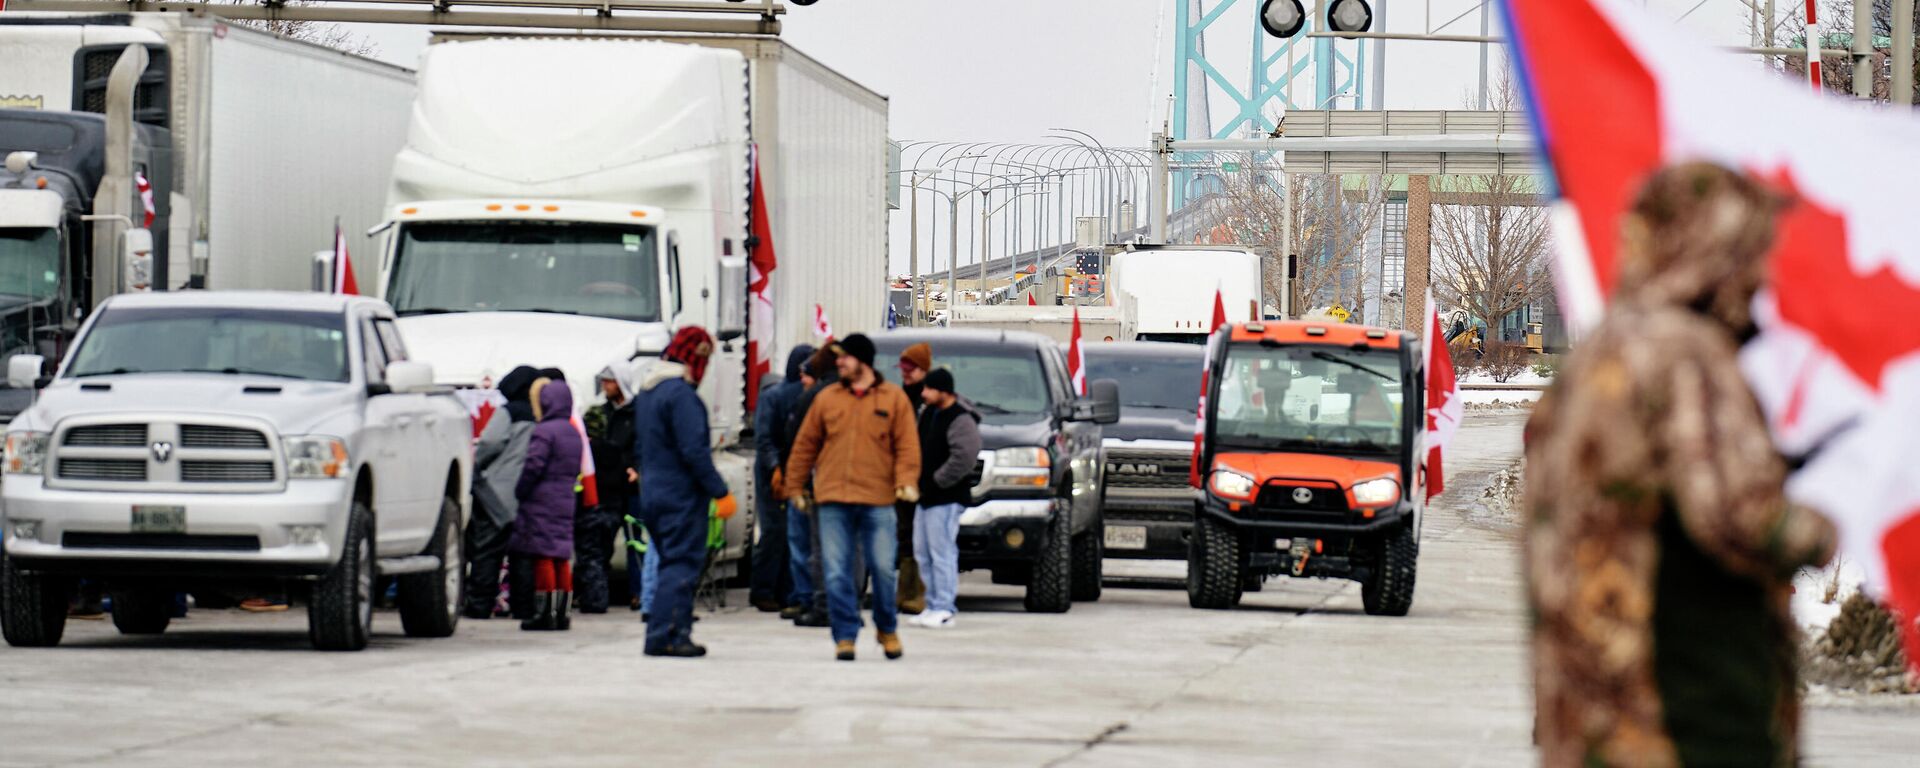 Supporters of the Truckers Convoy against the Covid-19 vaccine mandate block traffic in Canada bound lanes of the Ambassador Bridge border crossing, in Windsor, Ontario, on February 8, 2022. - Sputnik International, 1920, 27.04.2022